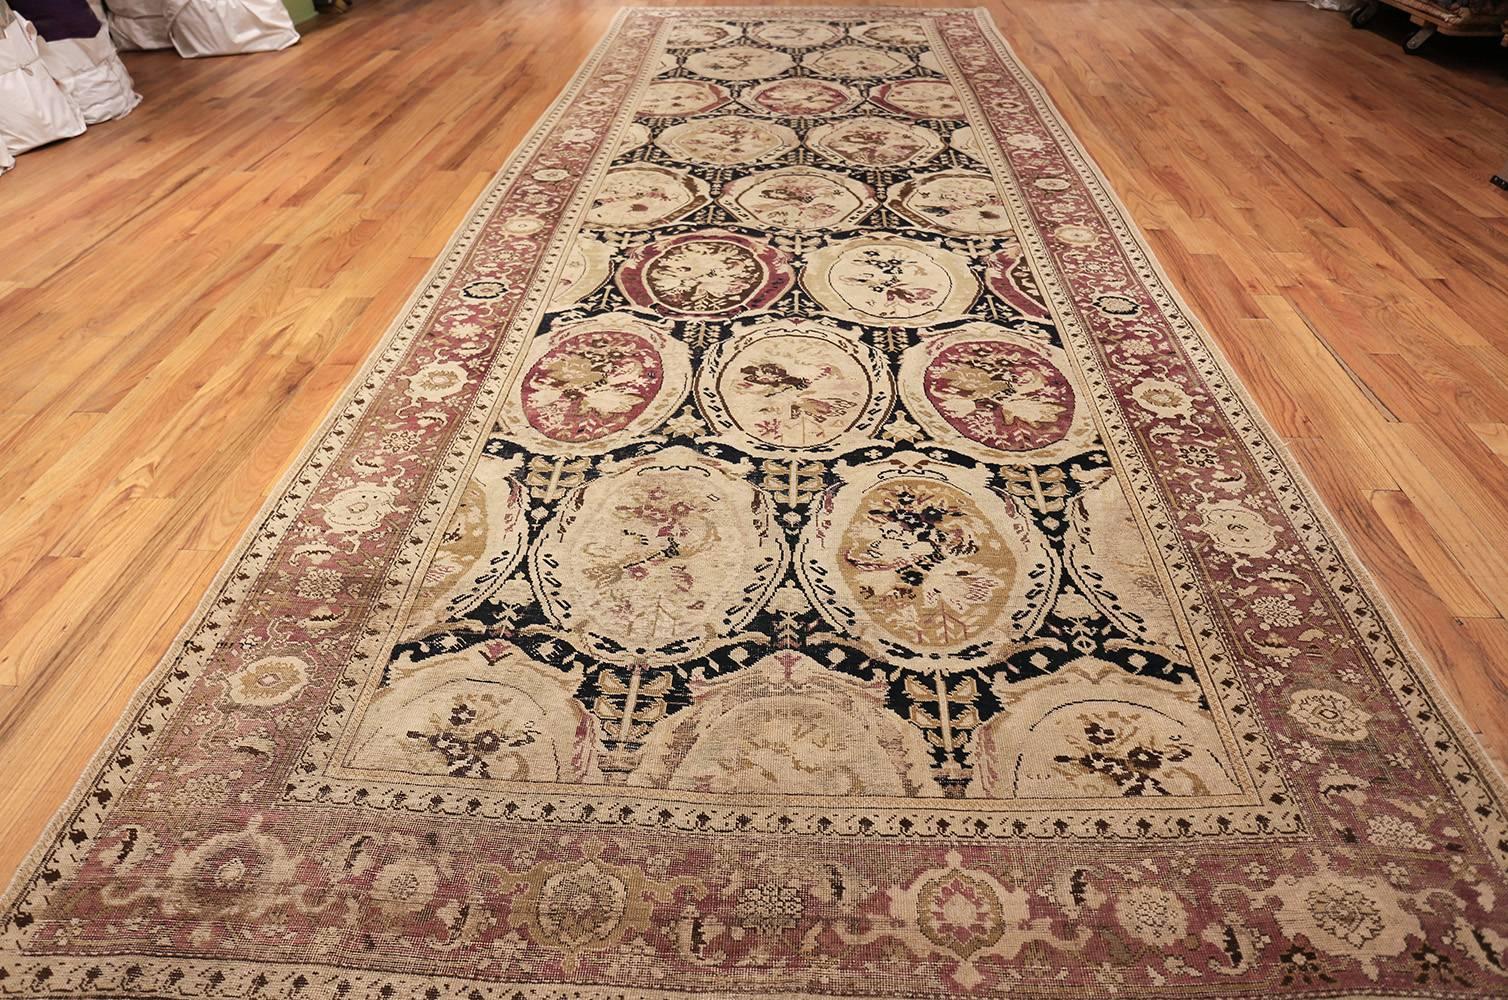  Hallway Gallery Size Antique Caucasian Karabagh Rug. Size: 6 ft 9 in x 19 ft 1